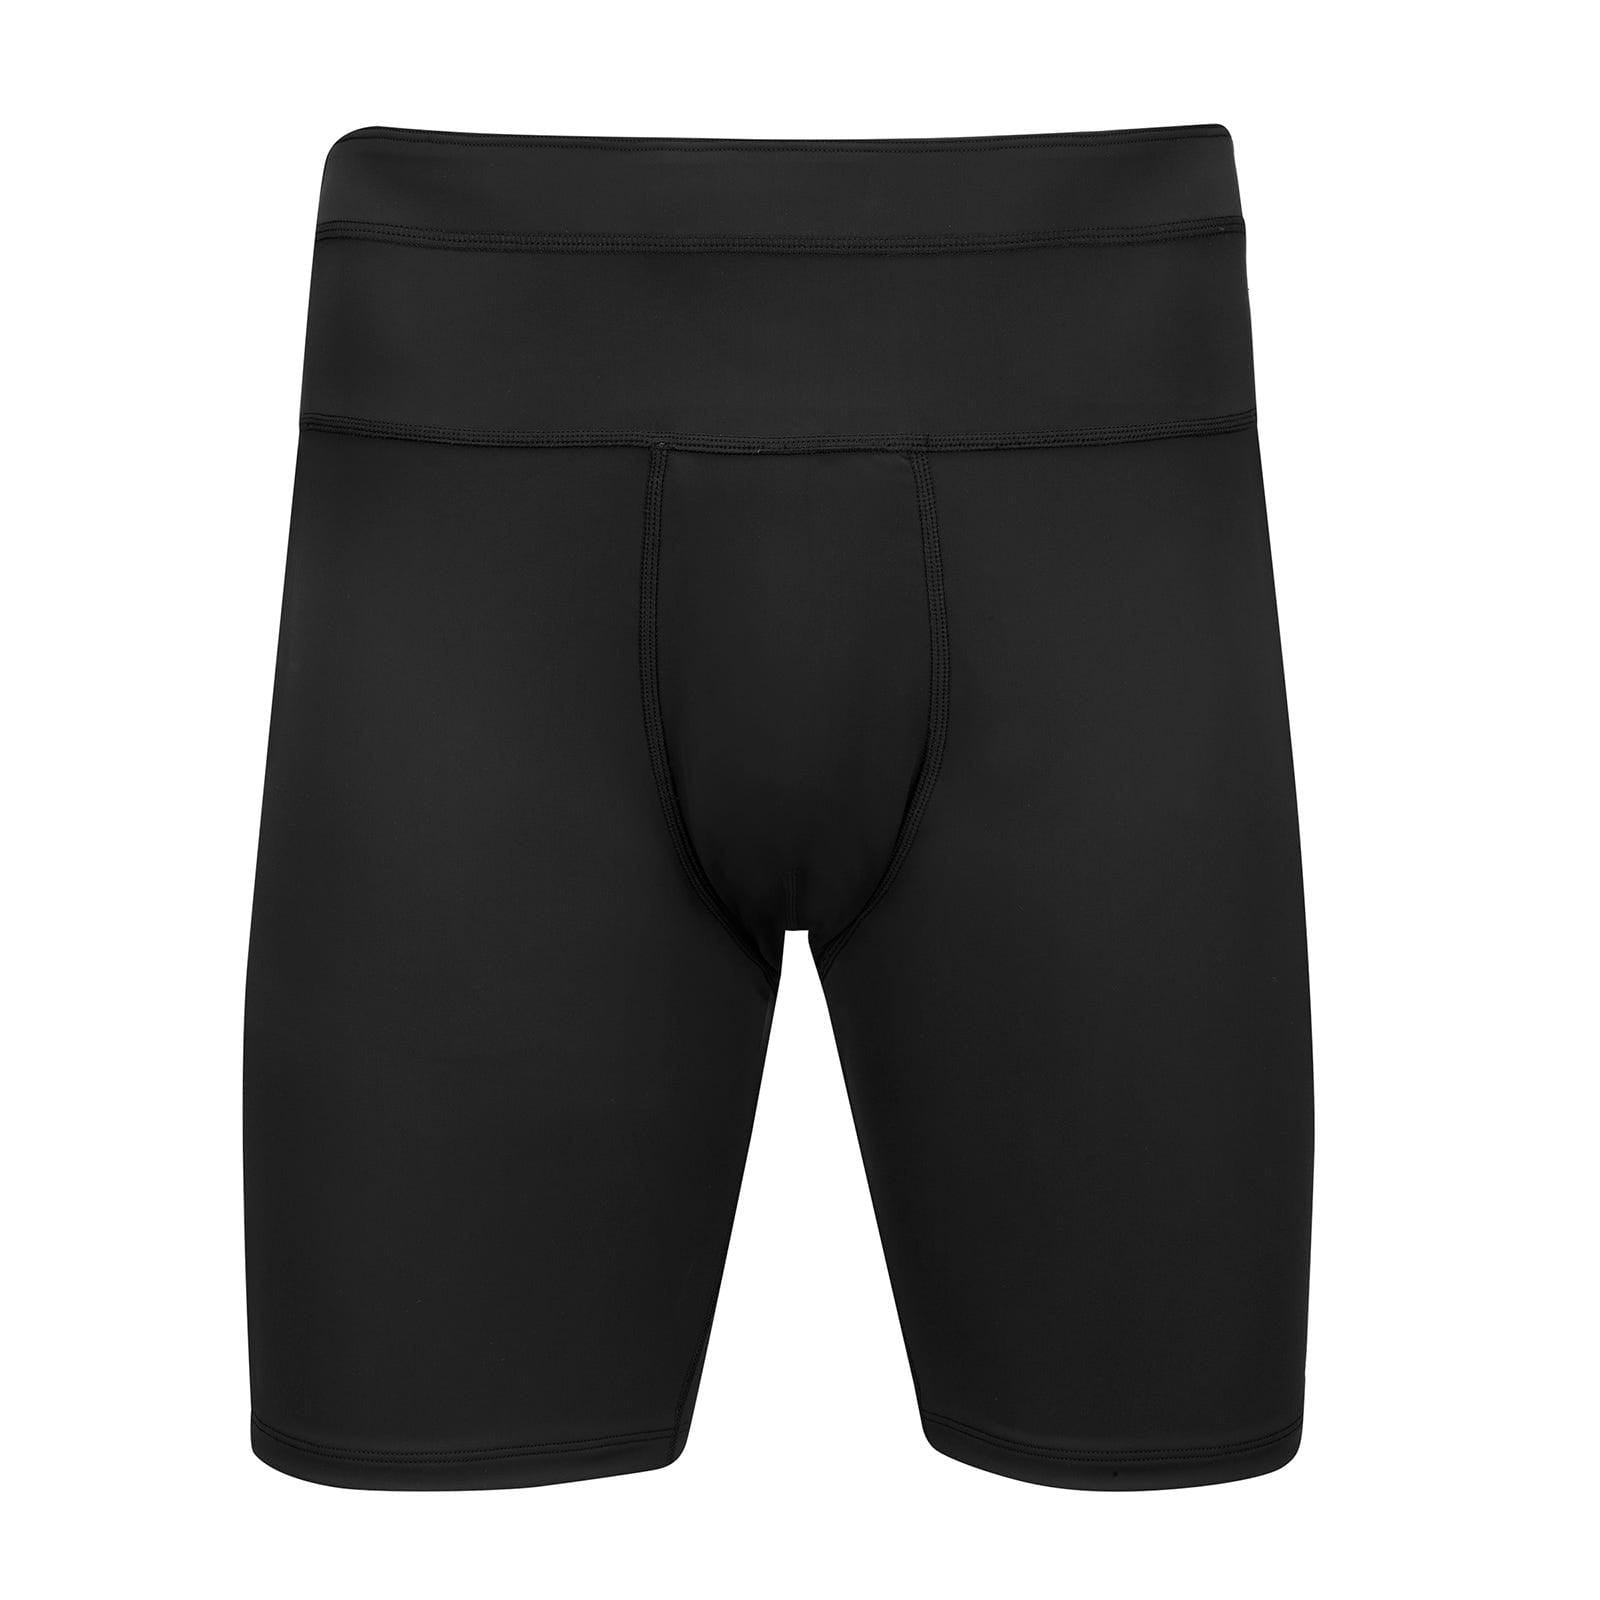 Protective Riding Shorts - Factory Recreation